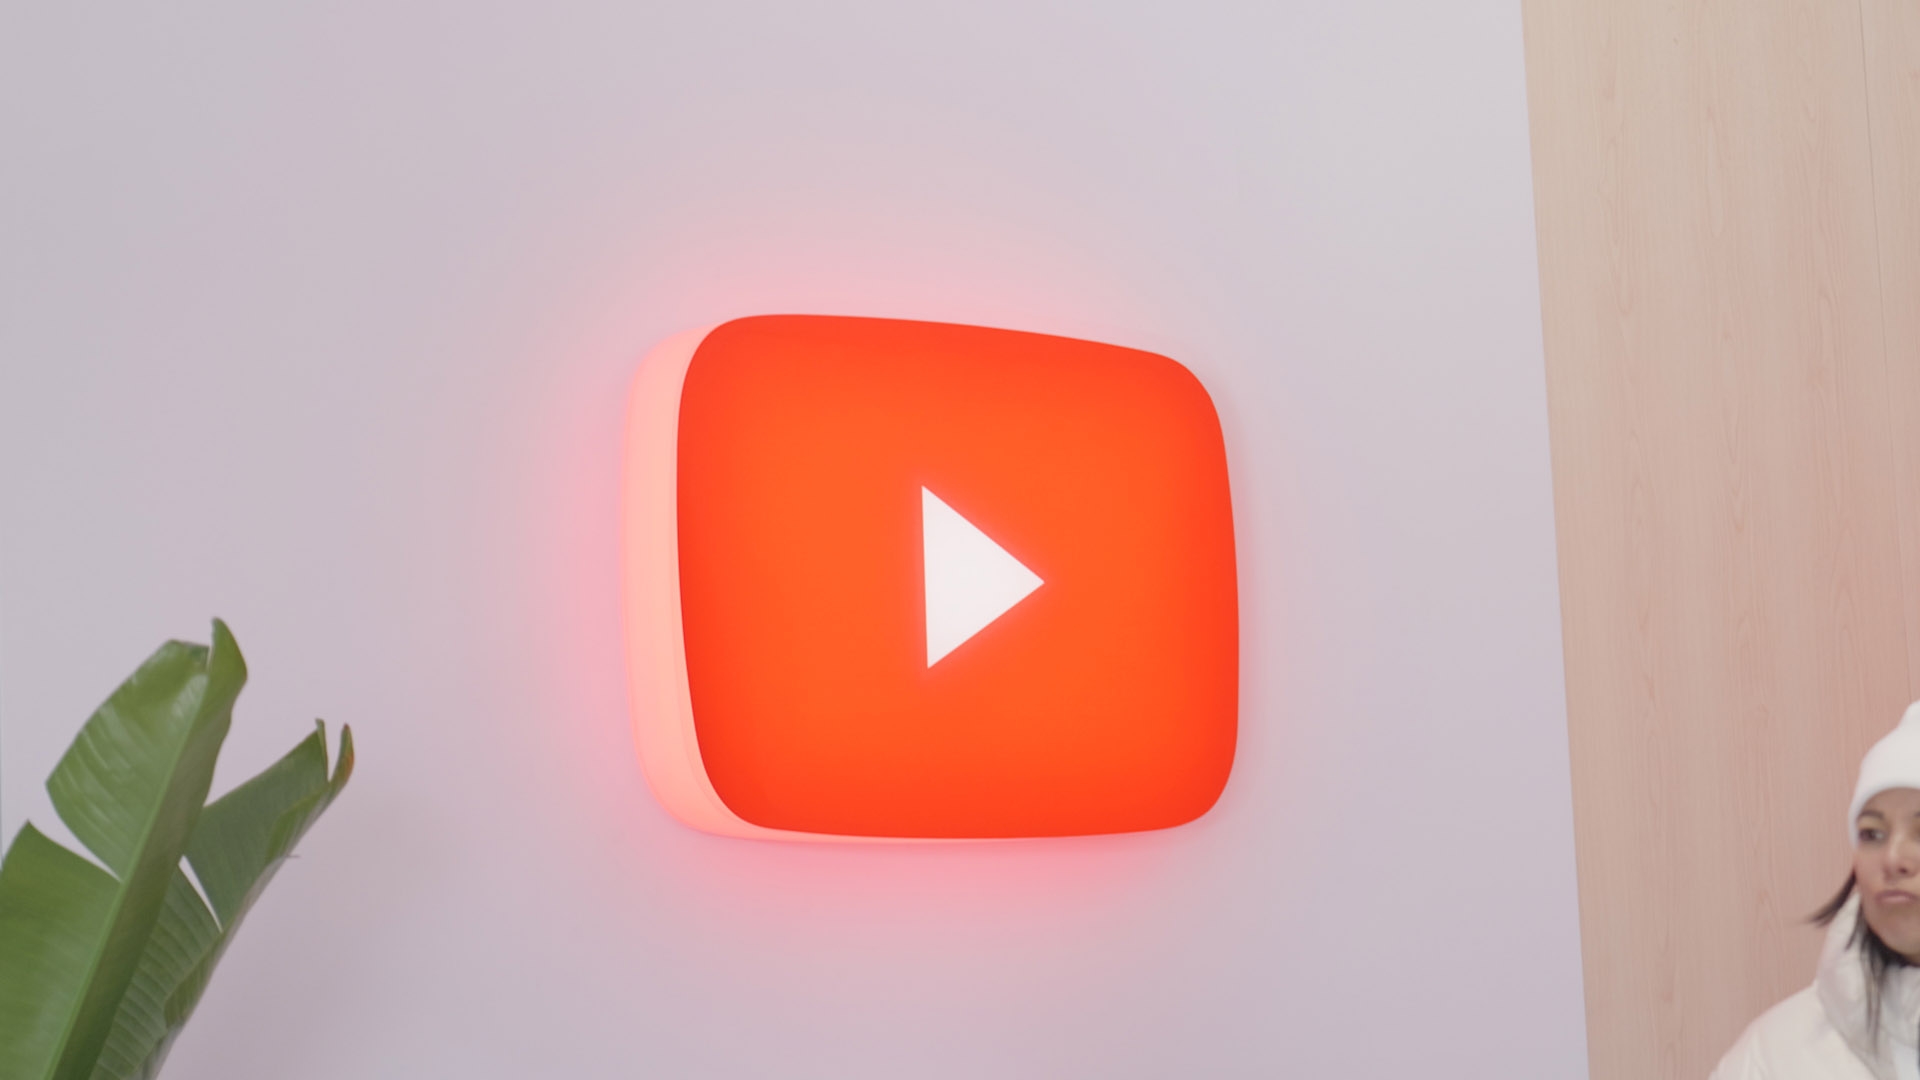 YouTube is experimenting with AI tools to aid with creative ideation.